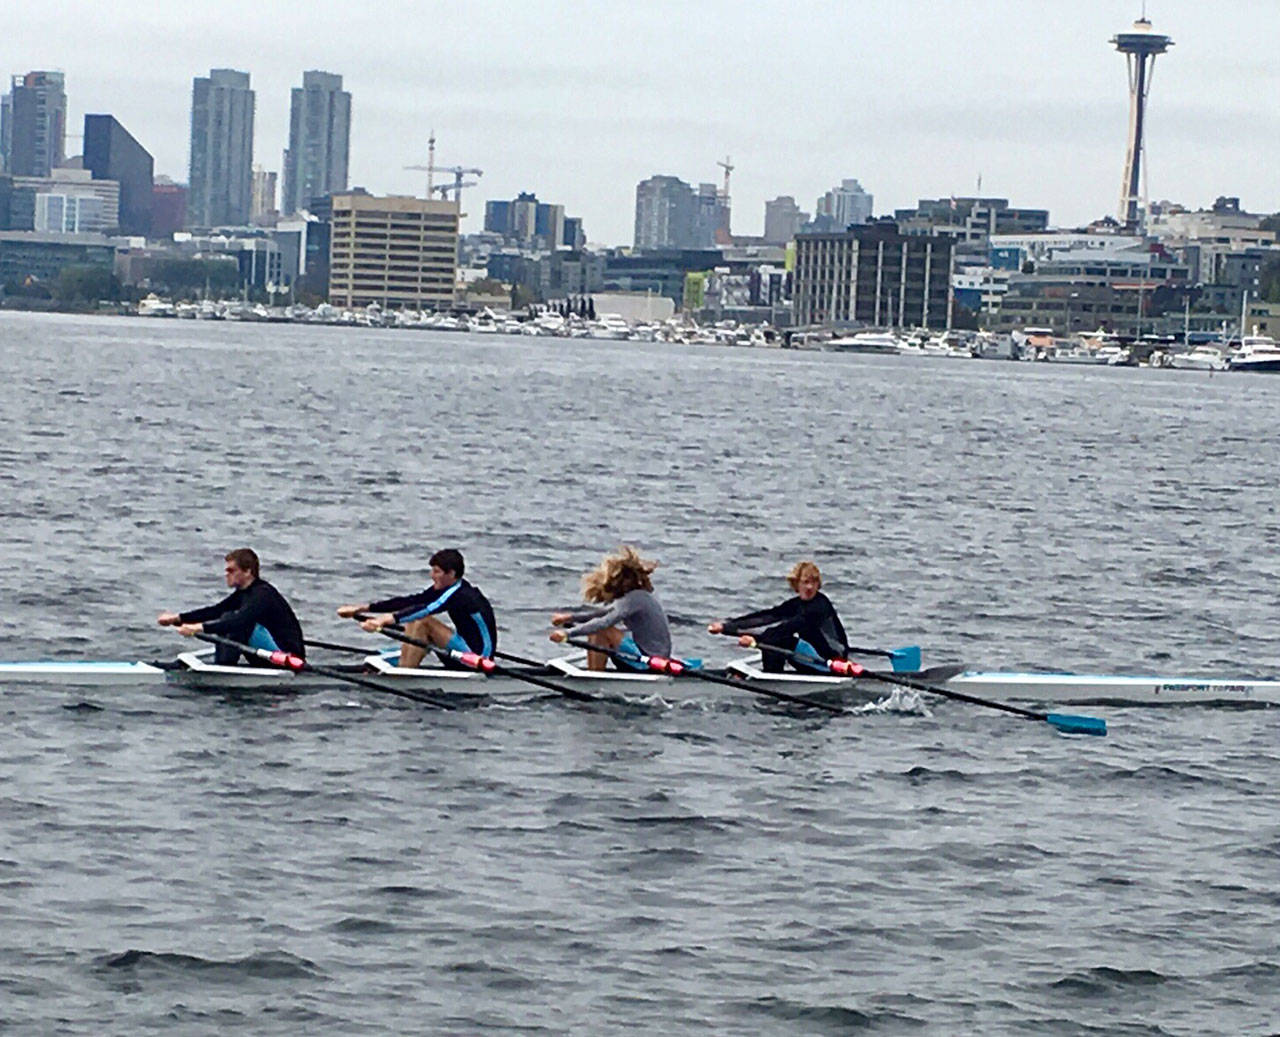 Lex Rosen, Nick Winkler, Baker Van Buren and Joshua Kyles on their way to a gold in the JV men’s 4X at the Tail of the Lake regatta on Sunday. (Courtesy Photo)